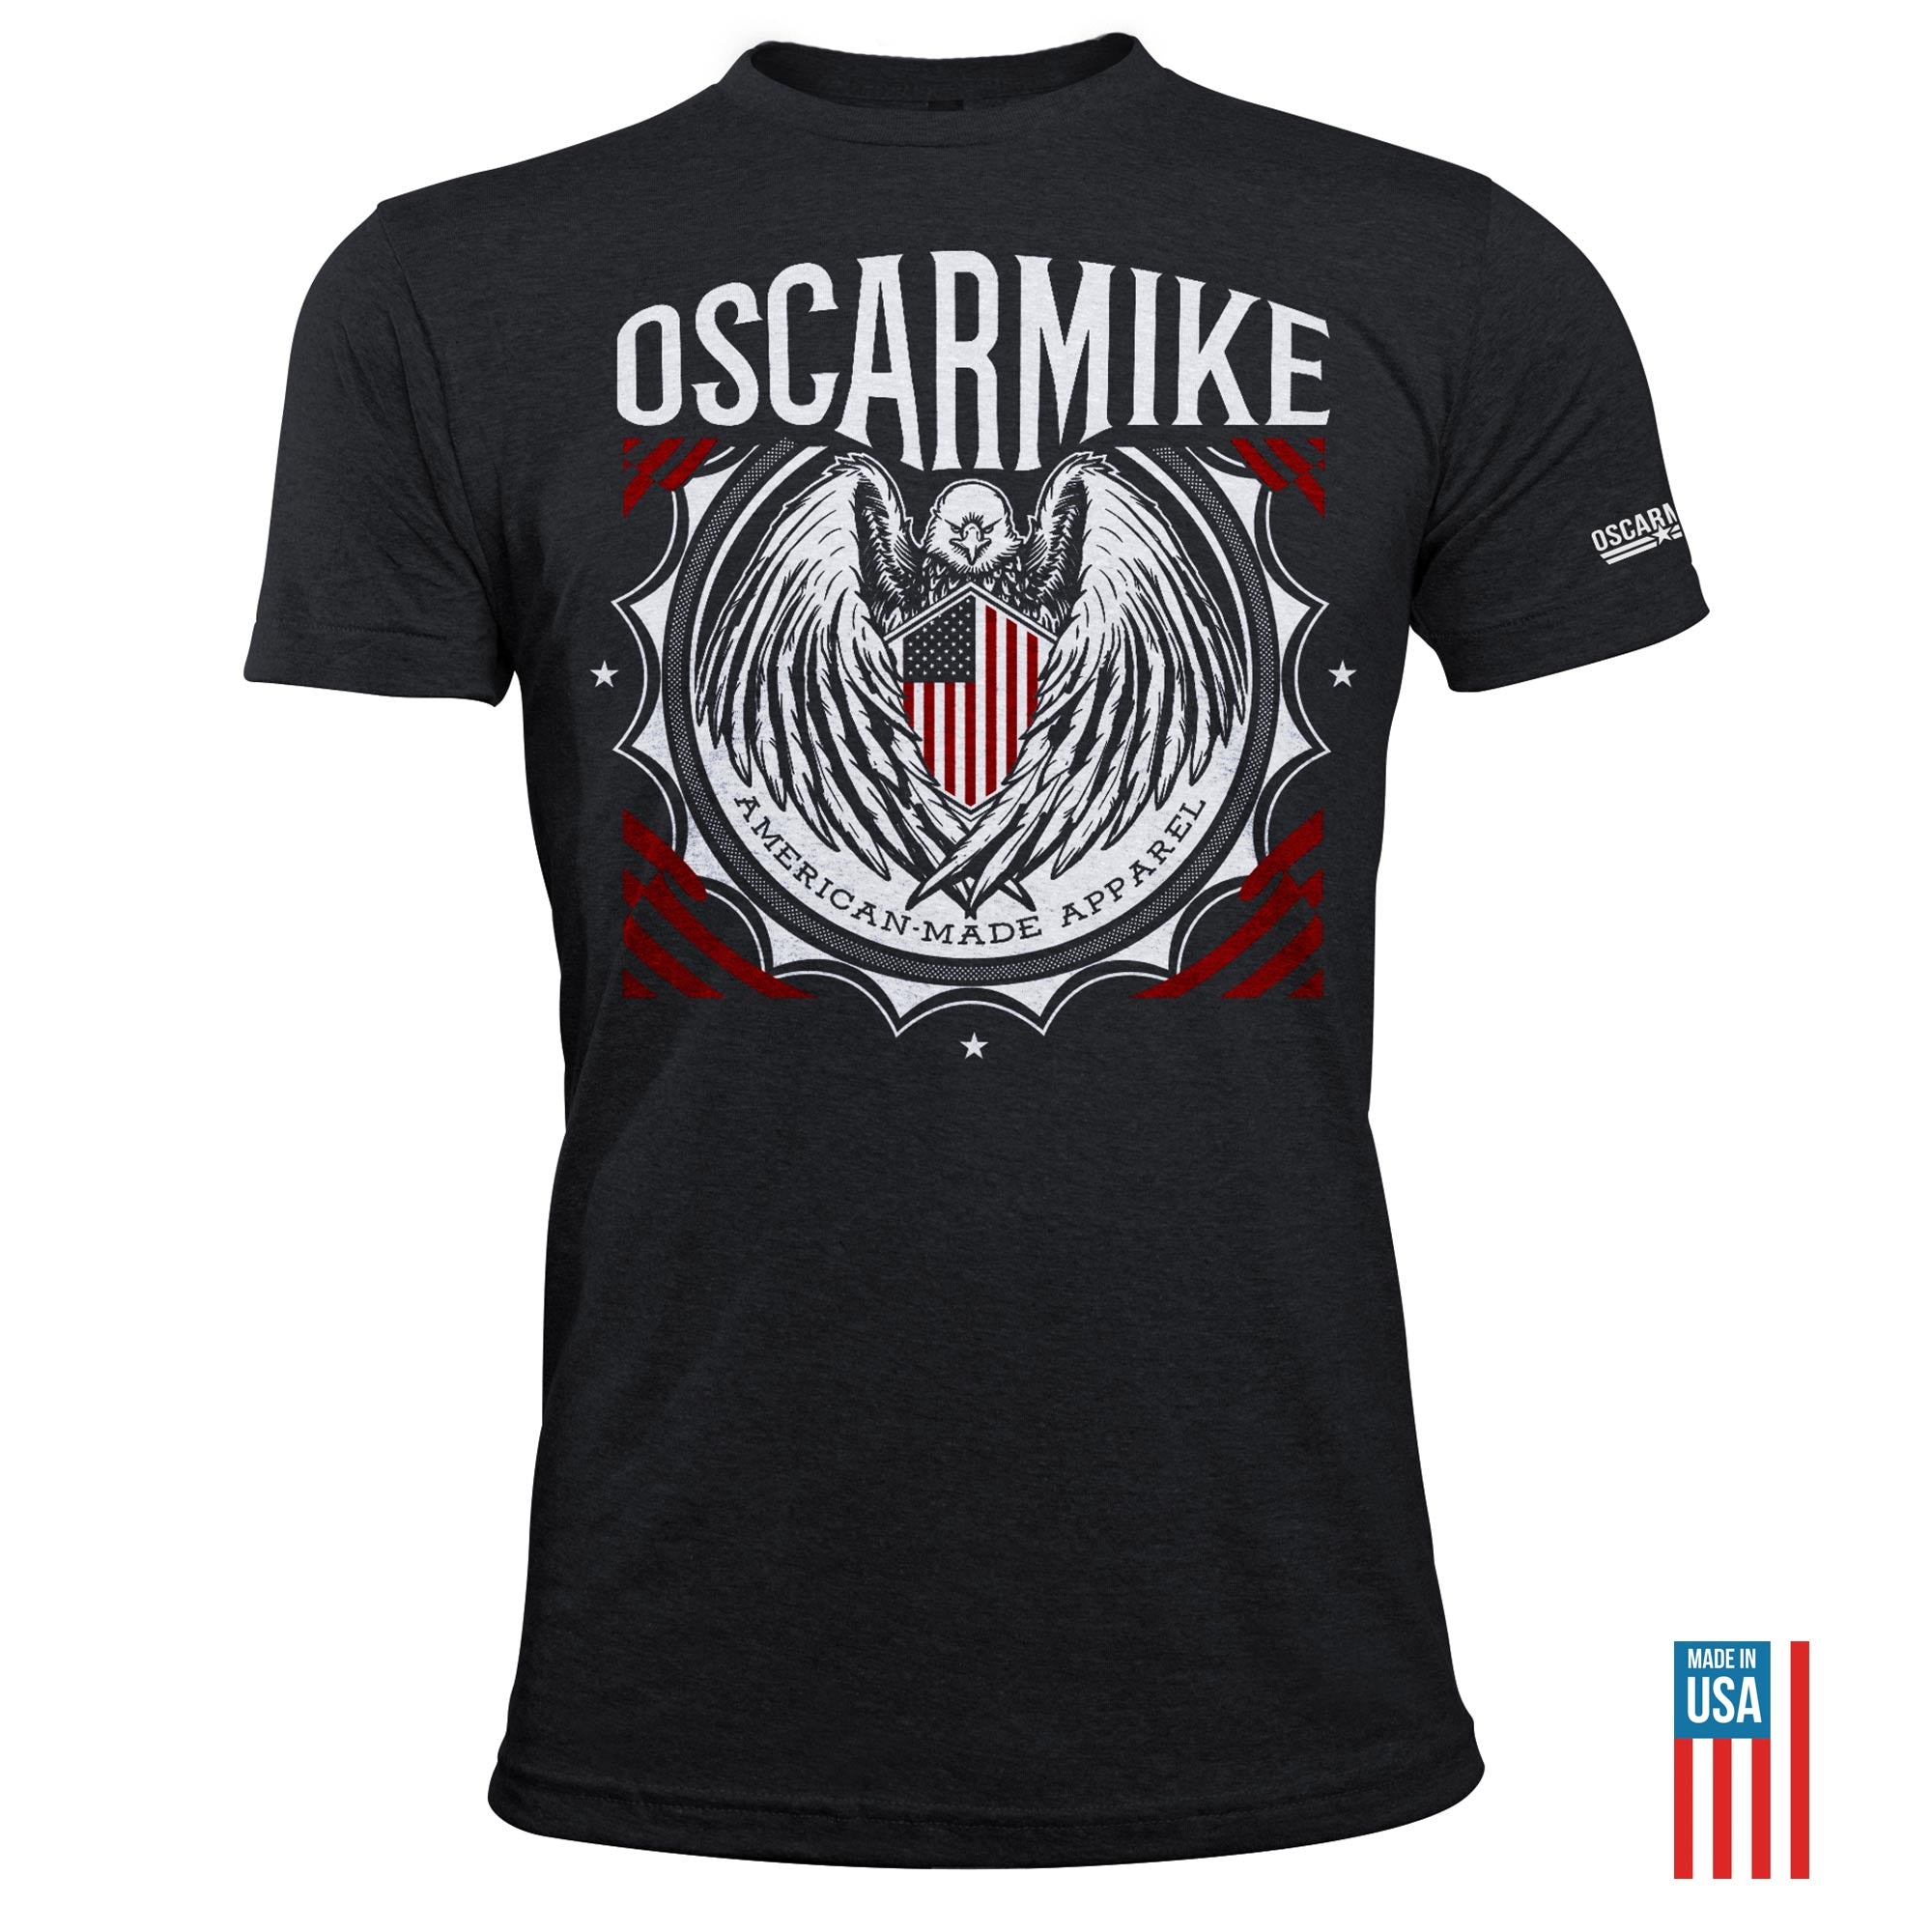 OM American Eagle Tee T-Shirt from Oscar Mike Apparel